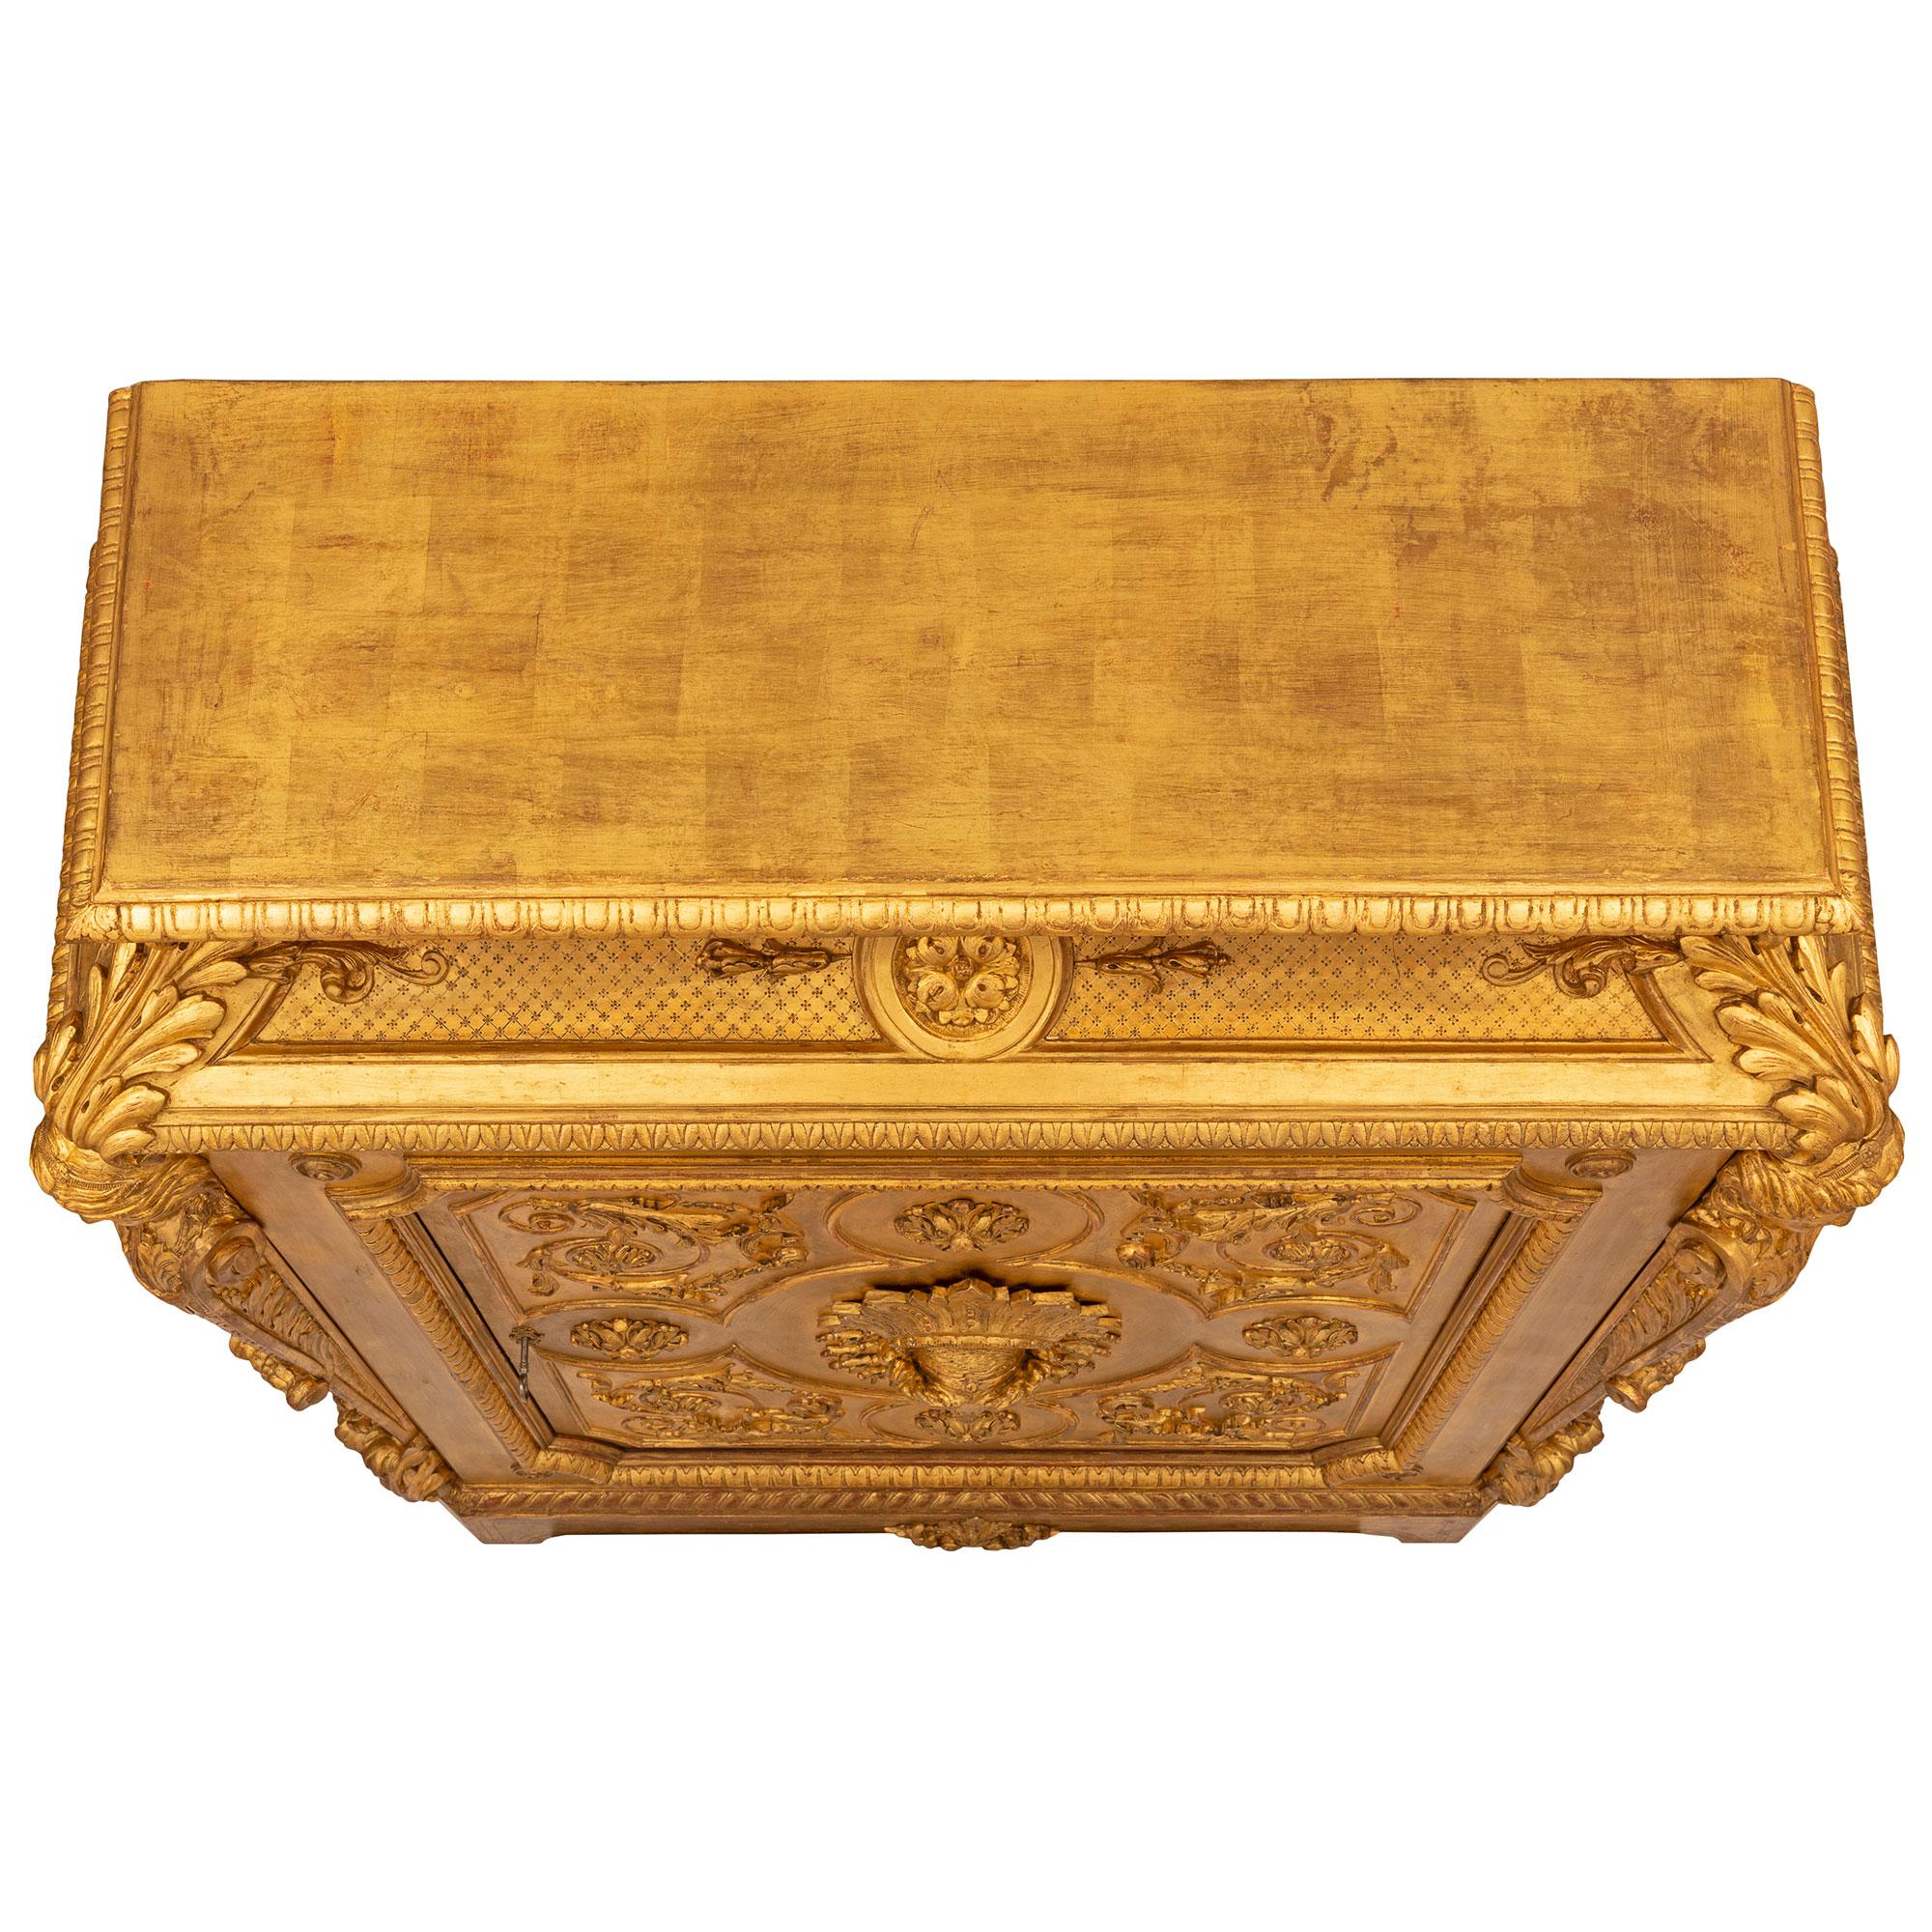 A stunning and extremely decorative French 19th century Louis XVI st. giltwood cabinet. The cabinet is raised by fine block supports with elegant fillets and a central carved foliate reserve. The single door displays an exceptional intricately